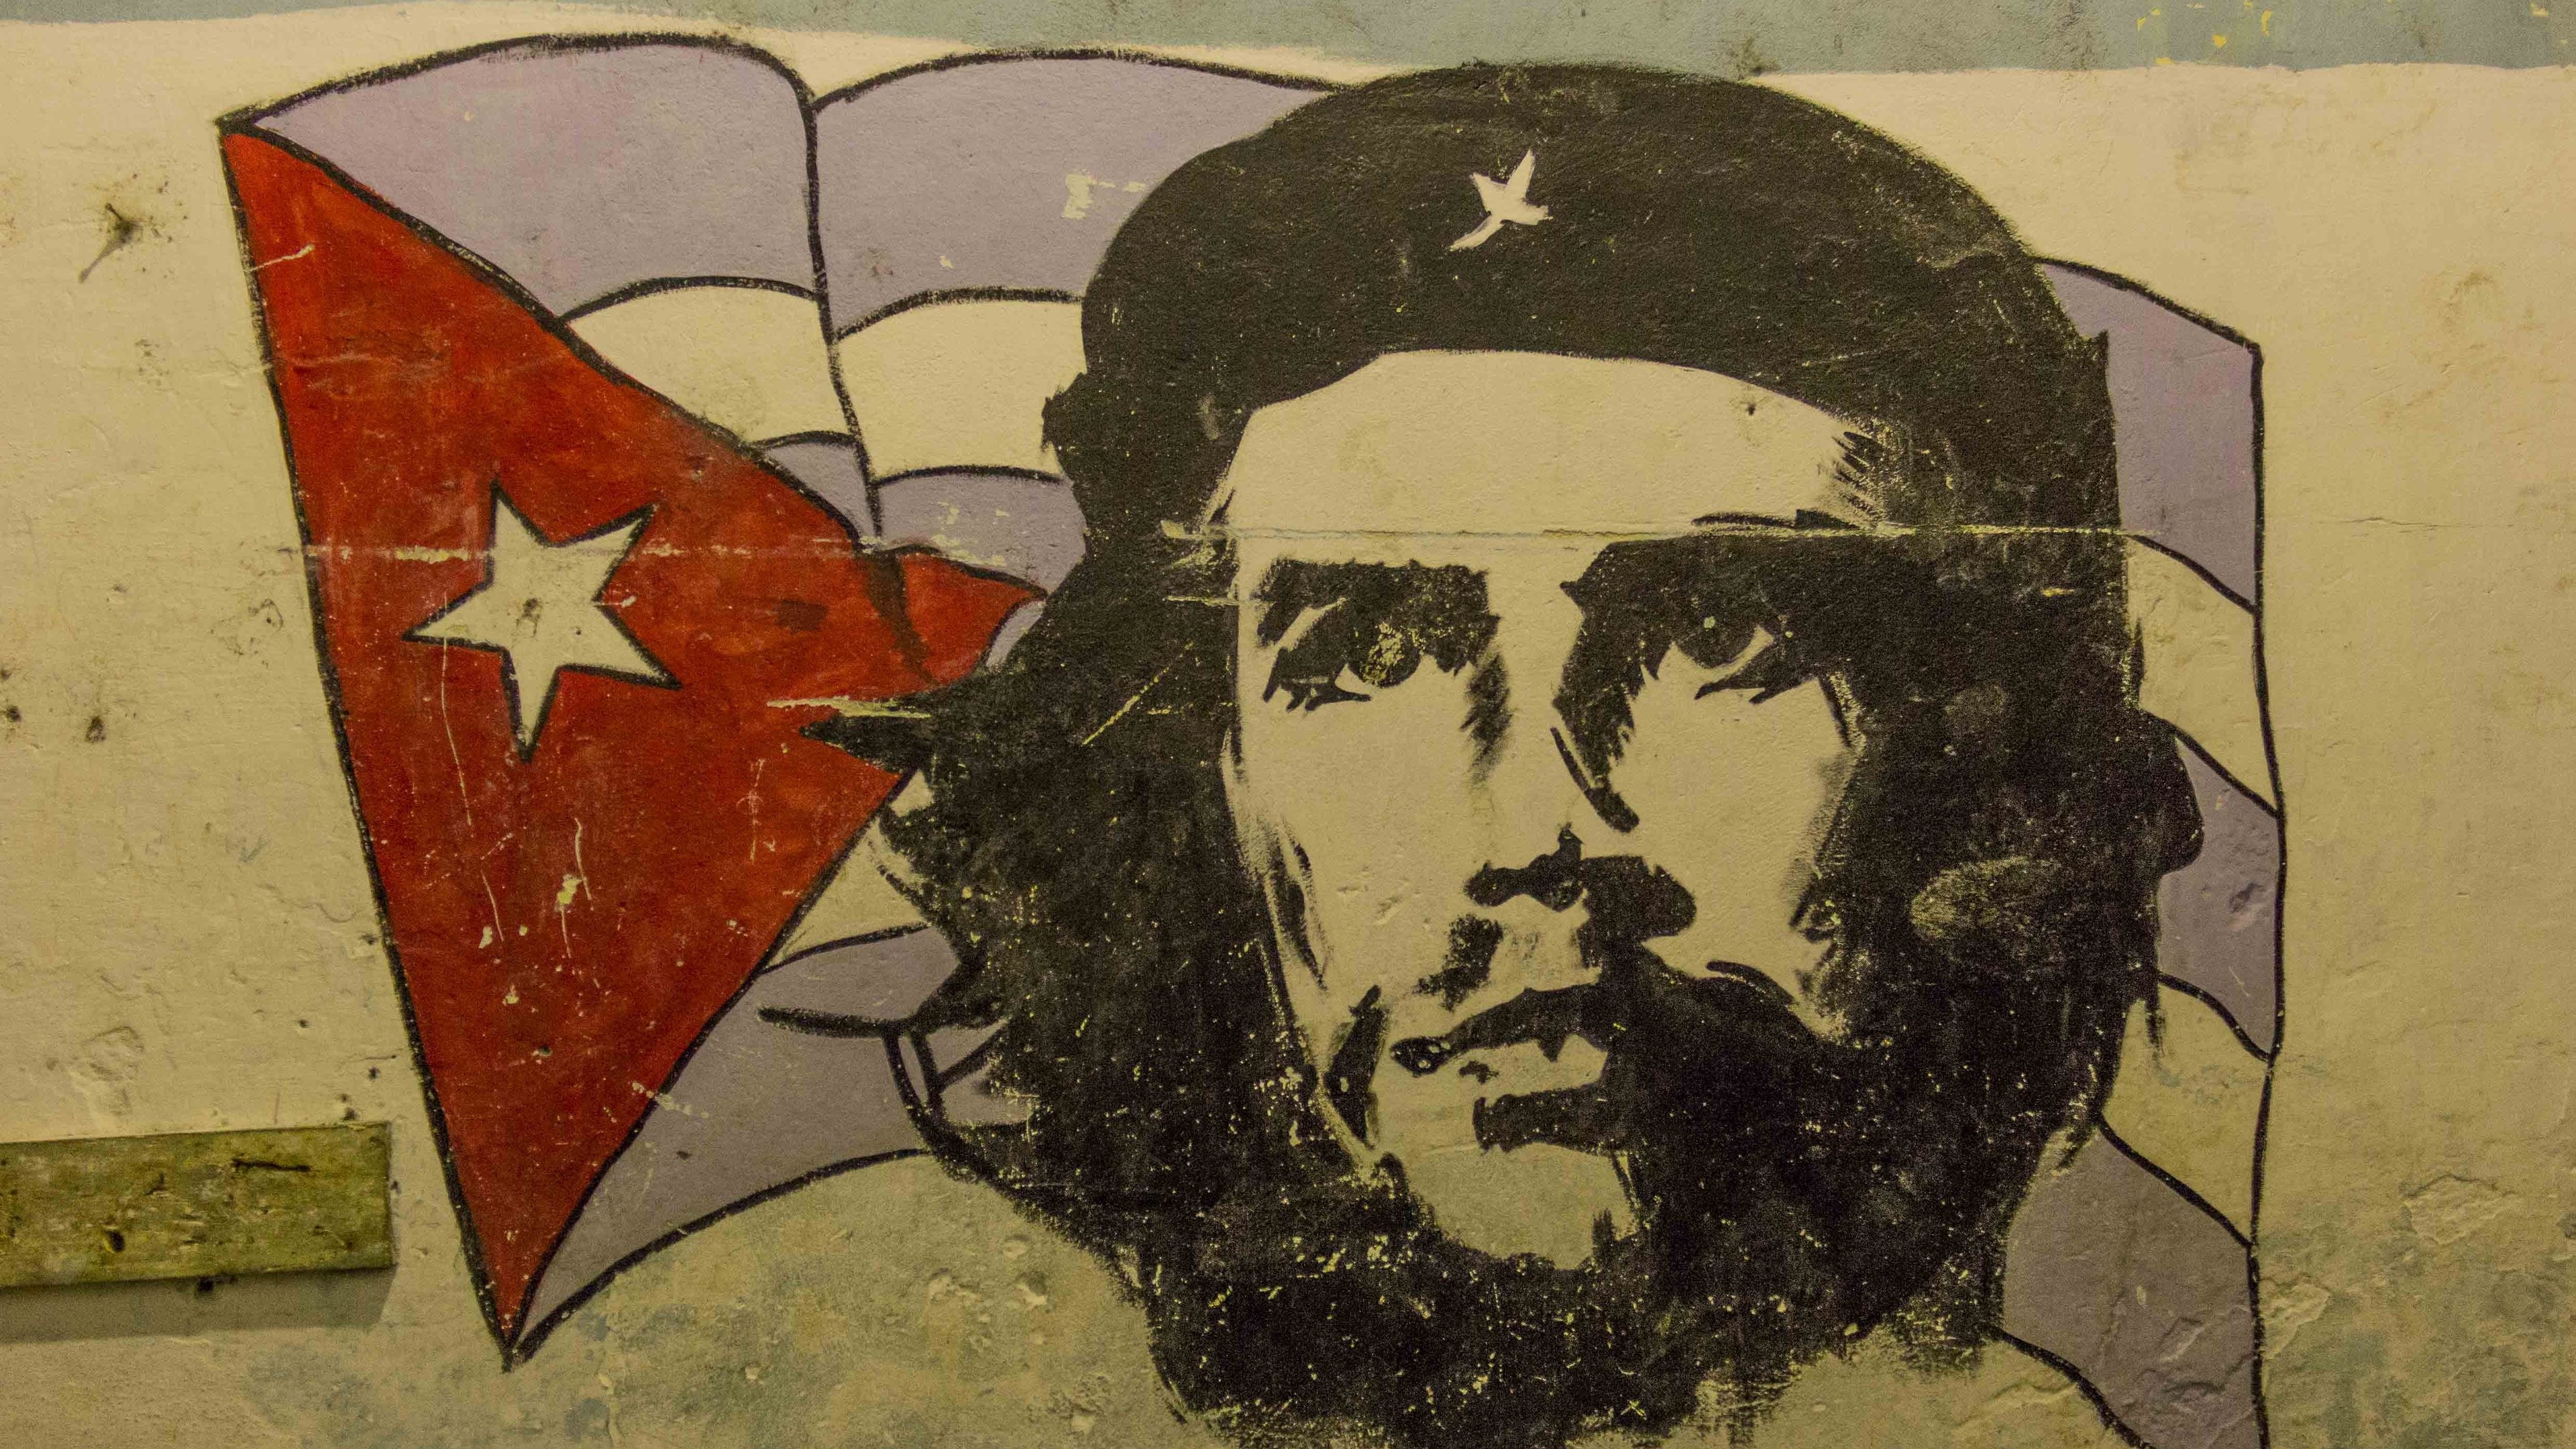 Mural Che Guevara for 3840 x 2160 Ultra HD resolution